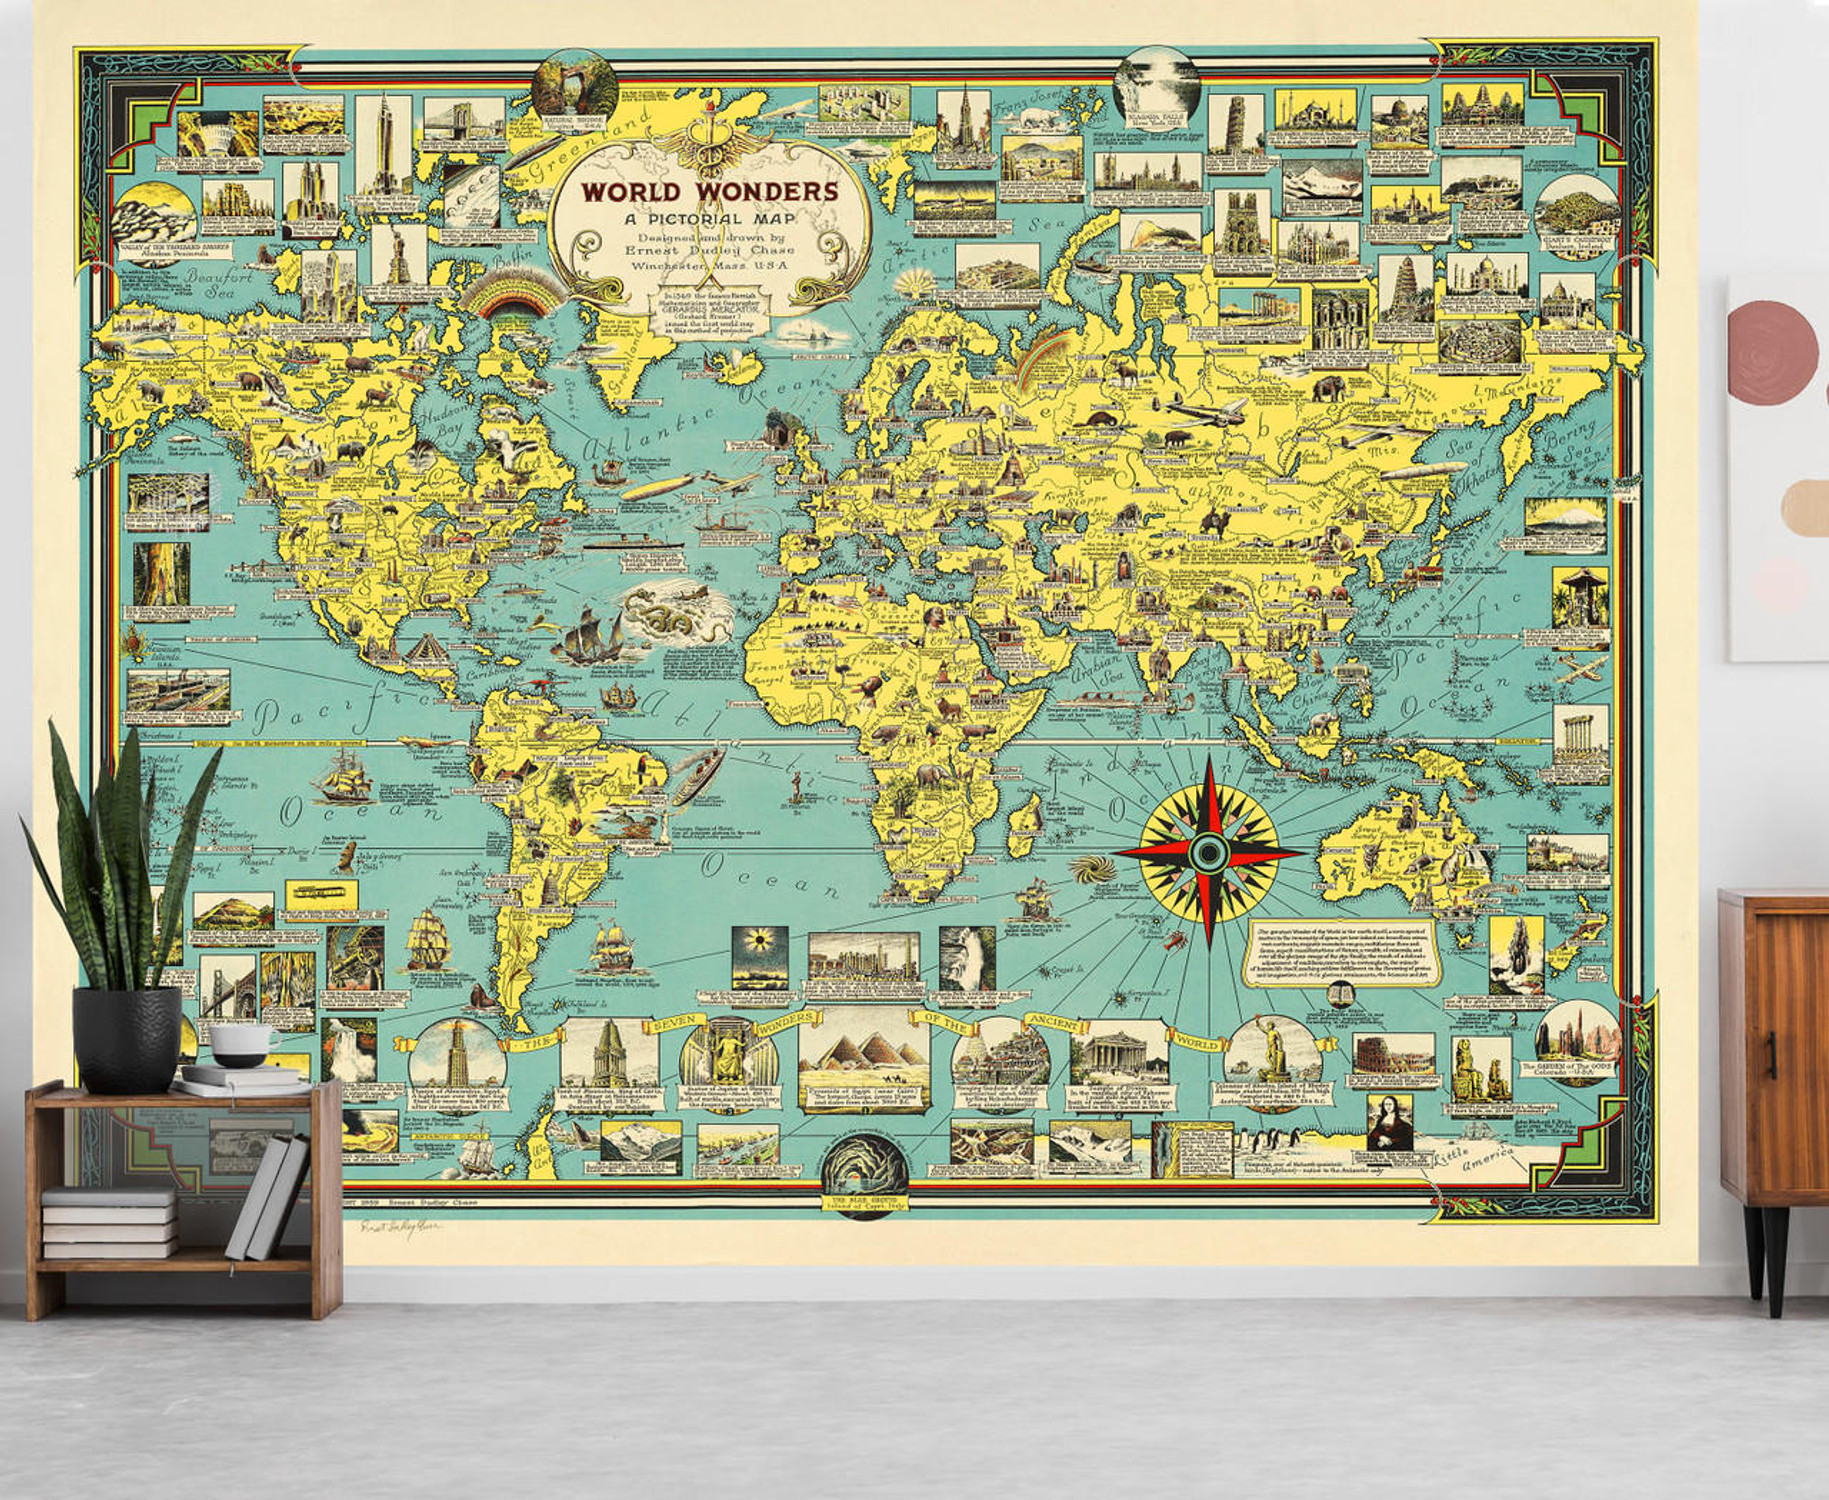 Vintage 1939 Illustrated Pictorial World Map Wall Mural, image 1, World Maps Online